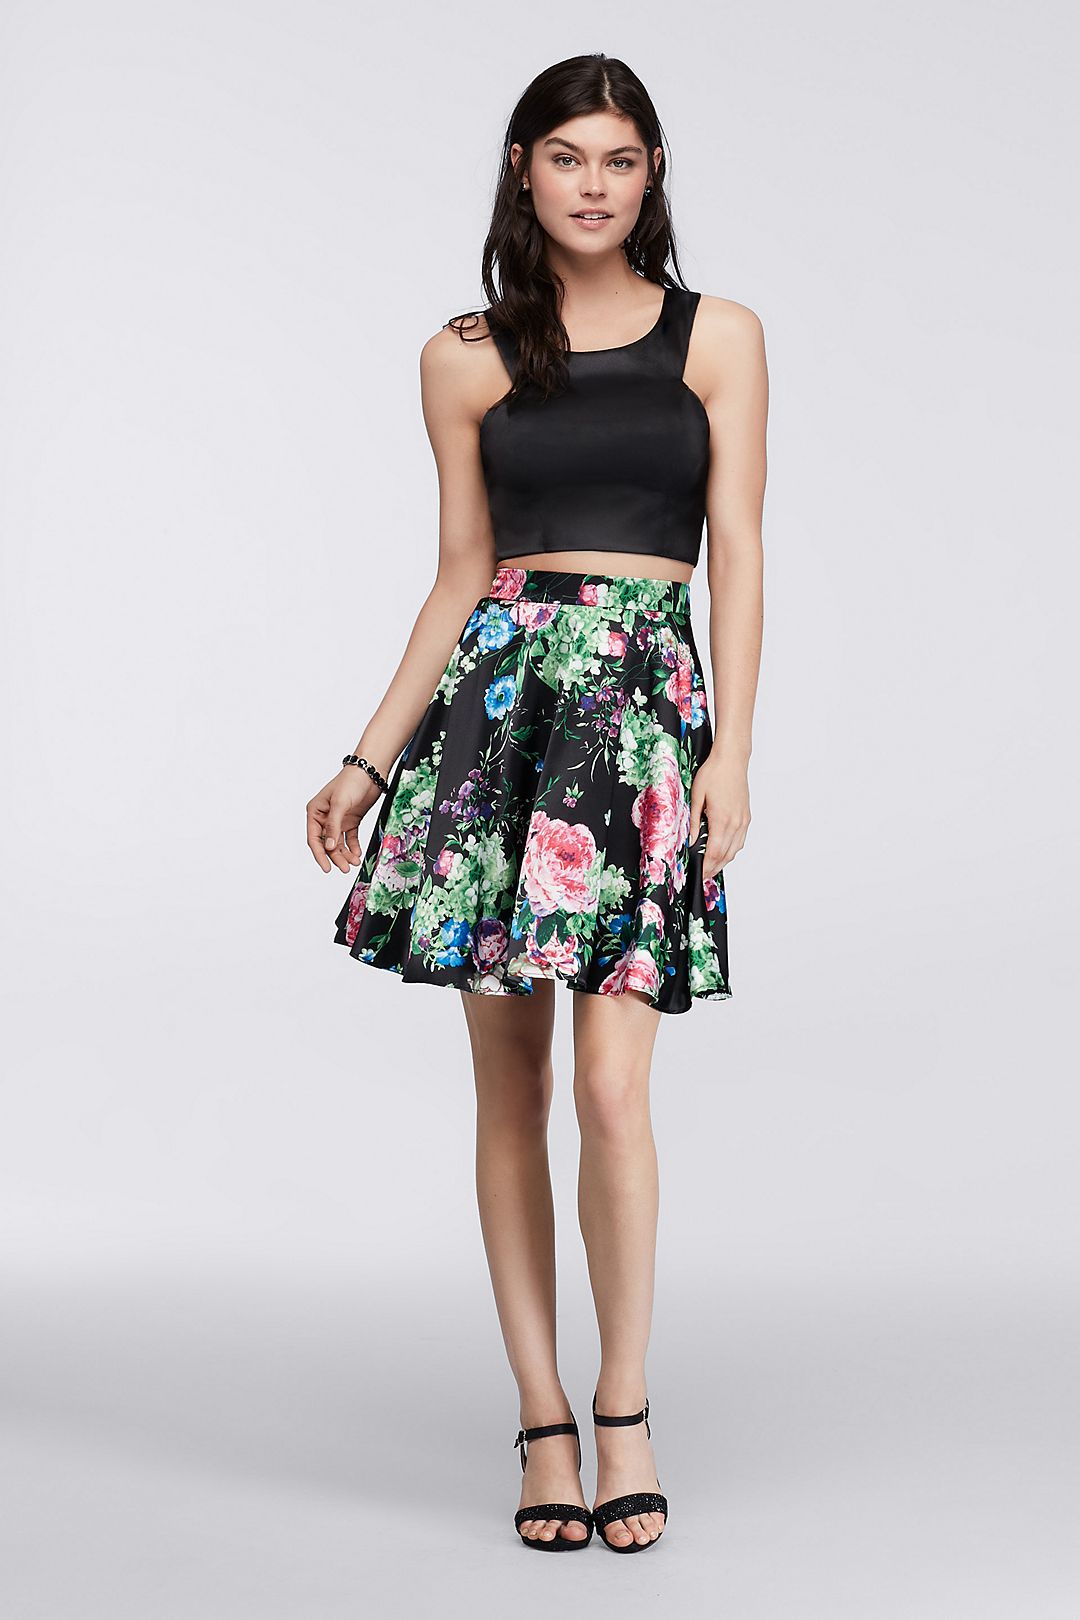 Homecoming Two Piece Crop Top and Floral Skirt Image